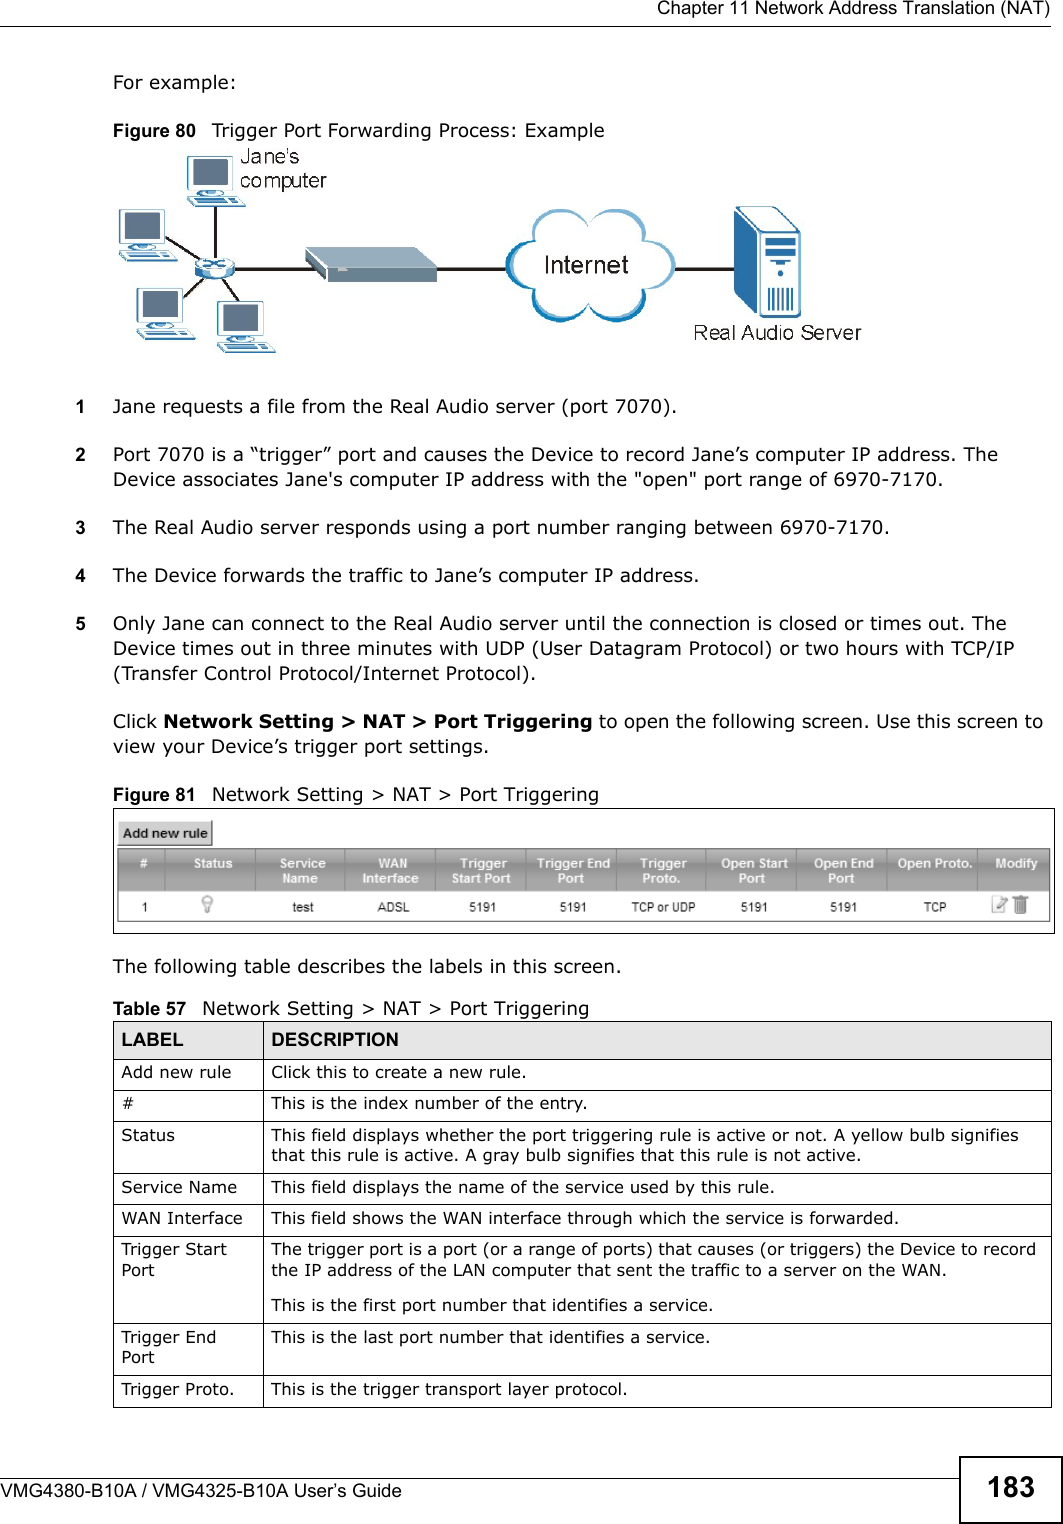  Chapter 11 Network Address Translation (NAT)VMG4380-B10A / VMG4325-B10A User’s Guide 183For example:Figure 80   Trigger Port Forwarding Process: Example1Jane requests a file from the Real Audio server (port 7070).2Port 7070 is a “trigger” port and causes the Device to record Jane’s computer IP address. The Device associates Jane&apos;s computer IP address with the &quot;open&quot; port range of 6970-7170.3The Real Audio server responds using a port number ranging between 6970-7170.4The Device forwards the traffic to Jane’s computer IP address.5Only Jane can connect to the Real Audio server until the connection is closed or times out. The Device times out in three minutes with UDP (User Datagram Protocol) or two hours with TCP/IP (Transfer Control Protocol/Internet Protocol). Click Network Setting &gt; NAT &gt; Port Triggering to open the following screen. Use this screen to view your Device’s trigger port settings.Figure 81   Network Setting &gt; NAT &gt; Port Triggering The following table describes the labels in this screen. Table 57   Network Setting &gt; NAT &gt; Port TriggeringLABEL DESCRIPTIONAdd new rule Click this to create a new rule.# This is the index number of the entry.Status This field displays whether the port triggering rule is active or not. A yellow bulb signifies that this rule is active. A gray bulb signifies that this rule is not active.Service Name This field displays the name of the service used by this rule.WAN Interface This field shows the WAN interface through which the service is forwarded.Trigger Start PortThe trigger port is a port (or a range of ports) that causes (or triggers) the Device to record the IP address of the LAN computer that sent the traffic to a server on the WAN.This is the first port number that identifies a service.Trigger End PortThis is the last port number that identifies a service.Trigger Proto. This is the trigger transport layer protocol. 